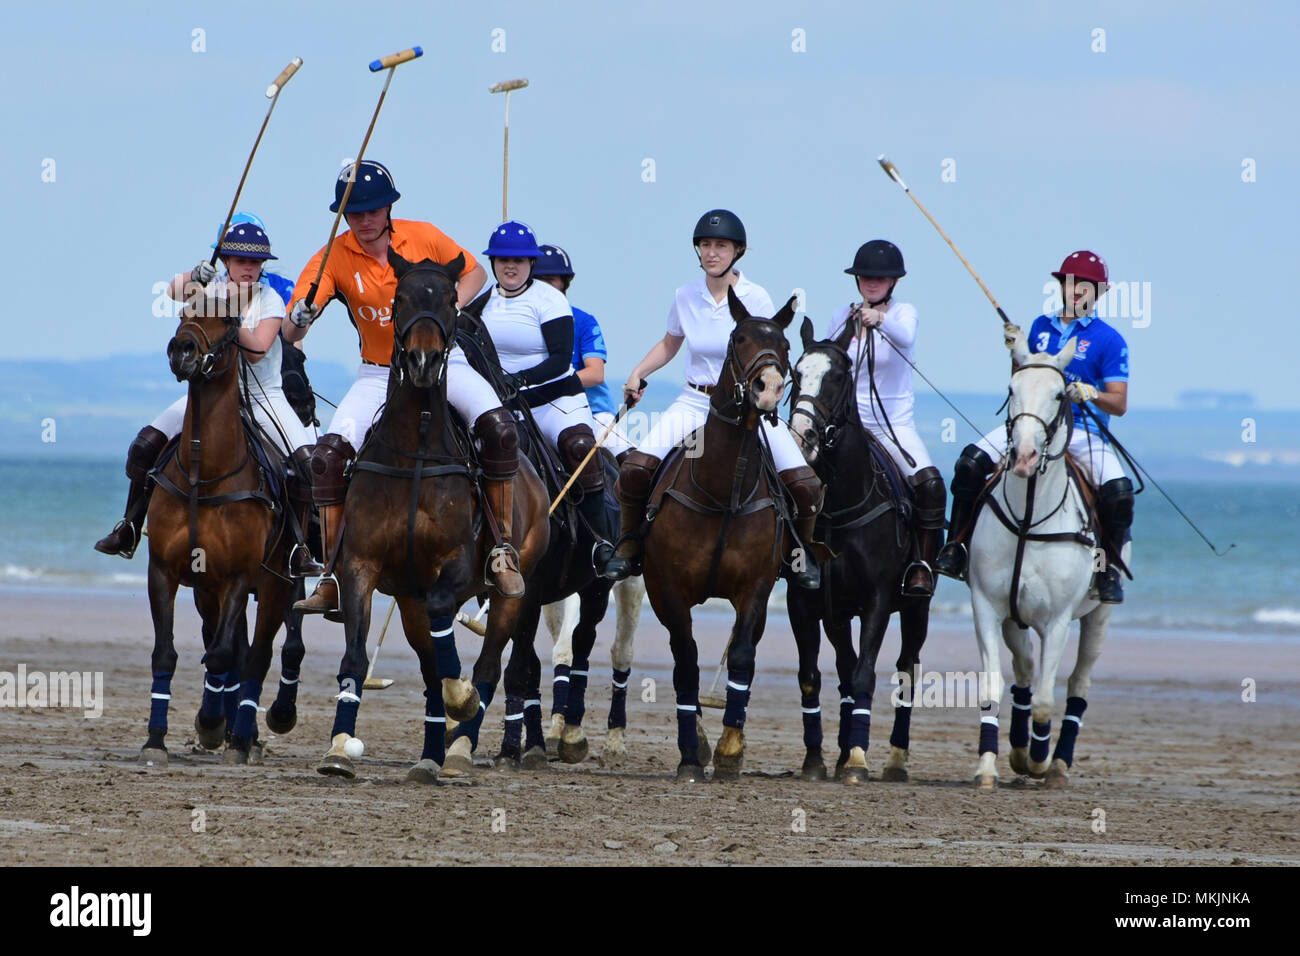 St Andrews, Scotland, United Kingdom, 08, May, 2018. St Andrews and Stirling University polo clubs play a friendly match on the beach at St Andrews, © Ken Jack / Alamy Live News Stock Photo